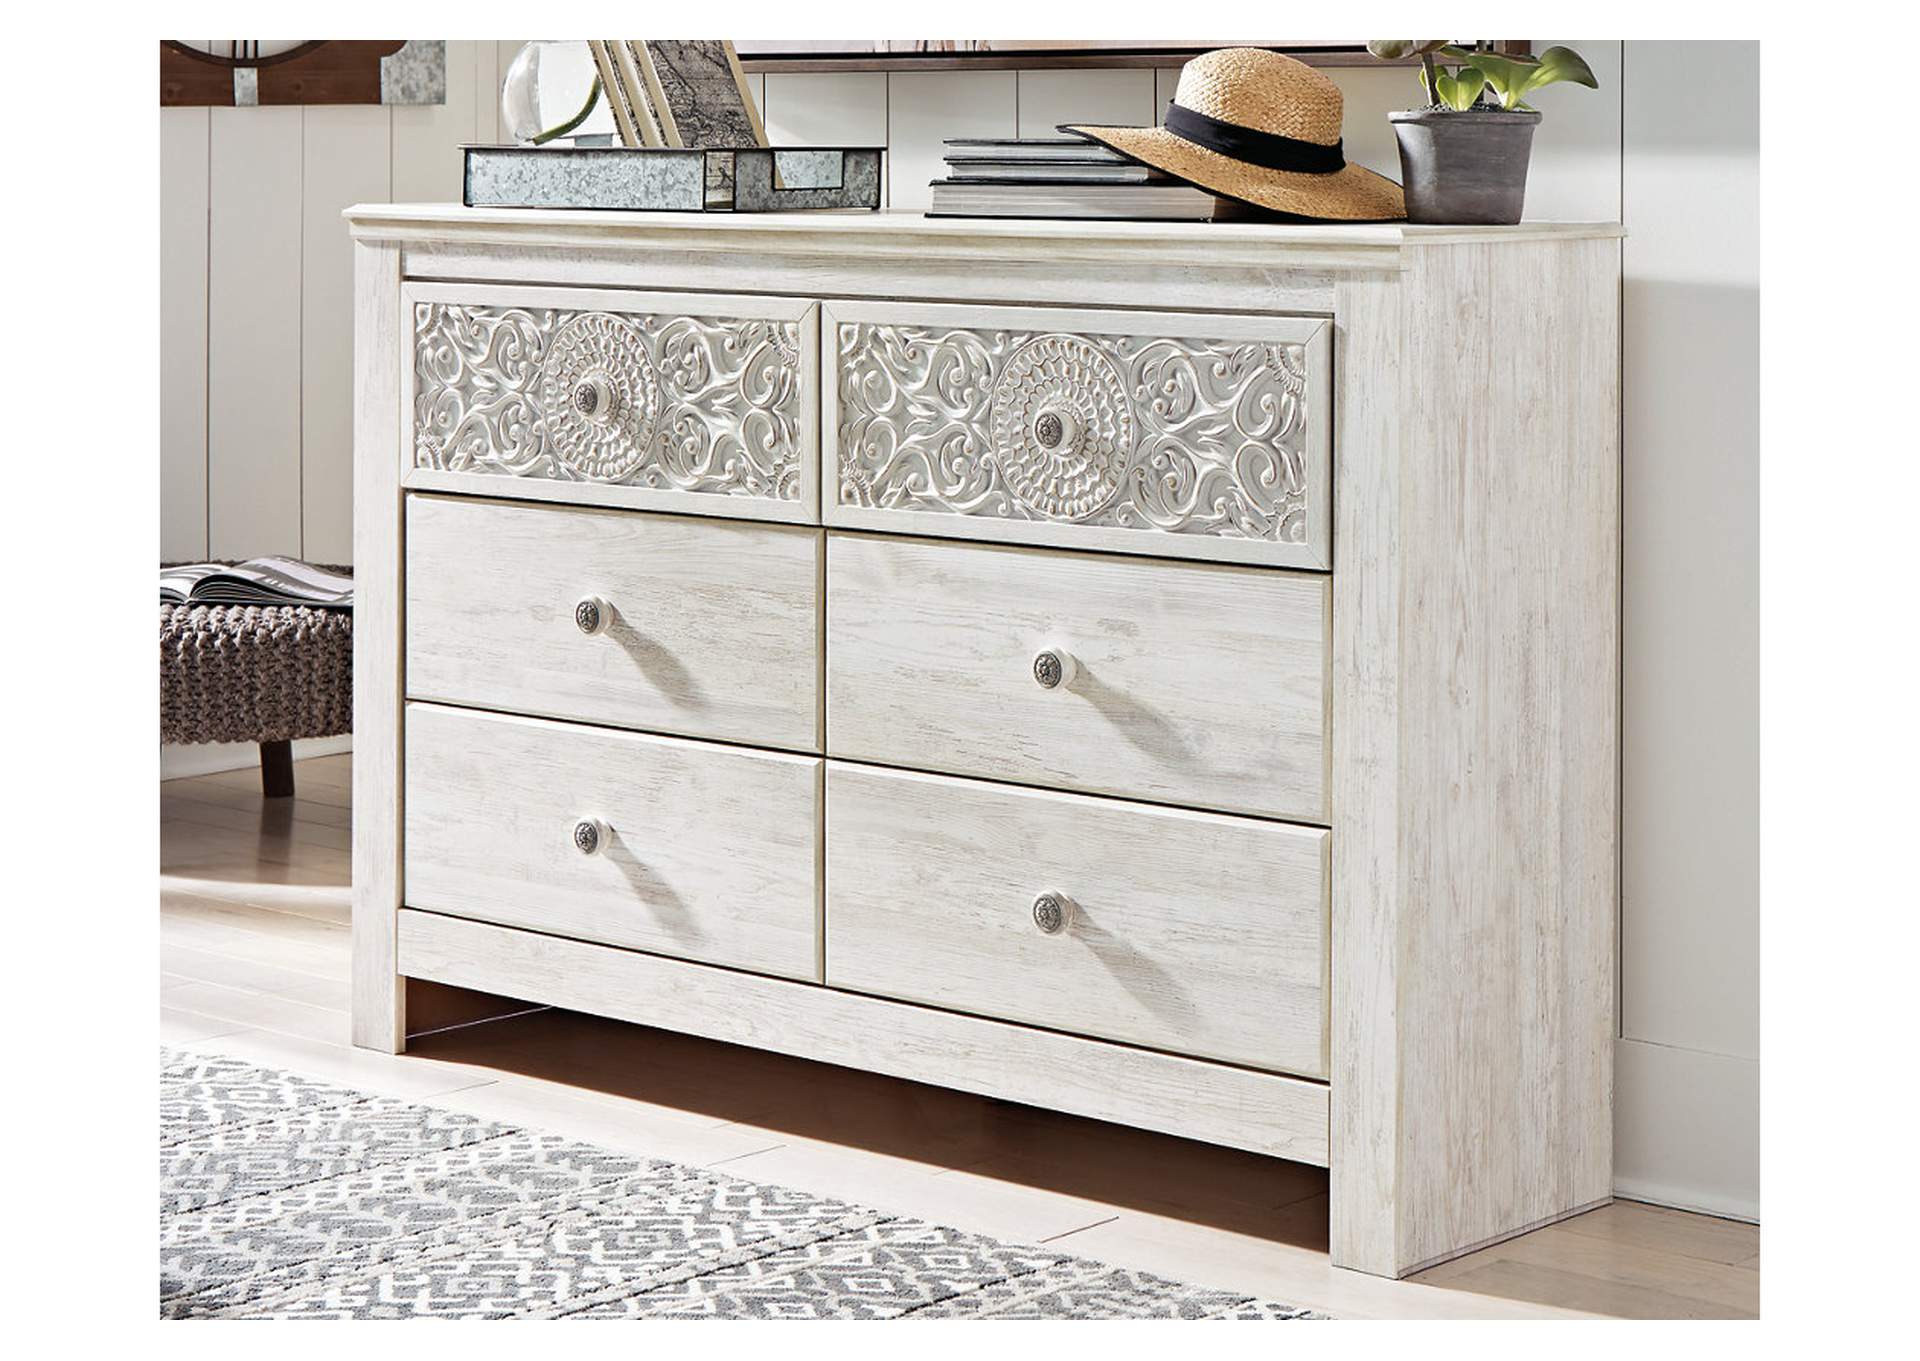 Paxberry White Dresser & Mirror - Kids Dressers and Mirrors